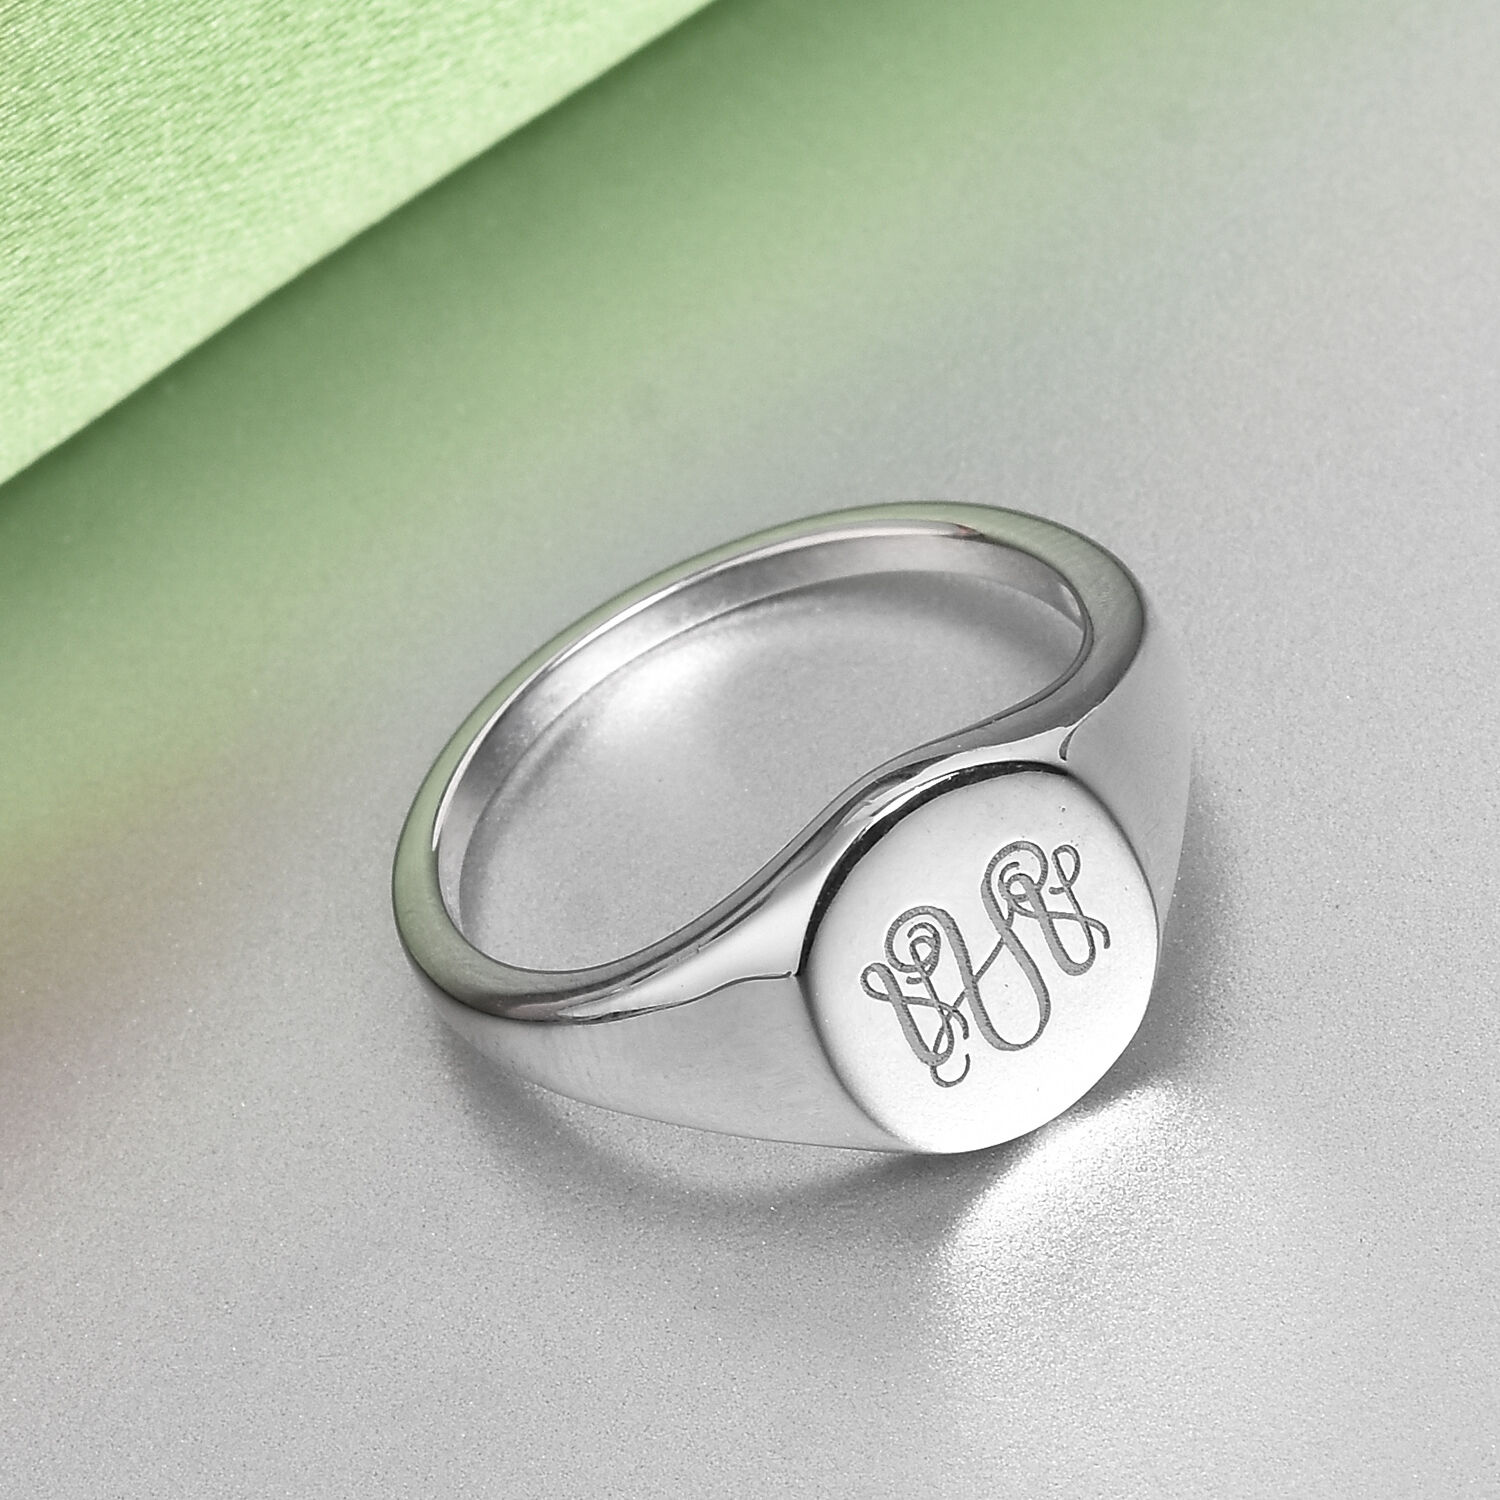 Oval Monogram Sterling Silver Ring 